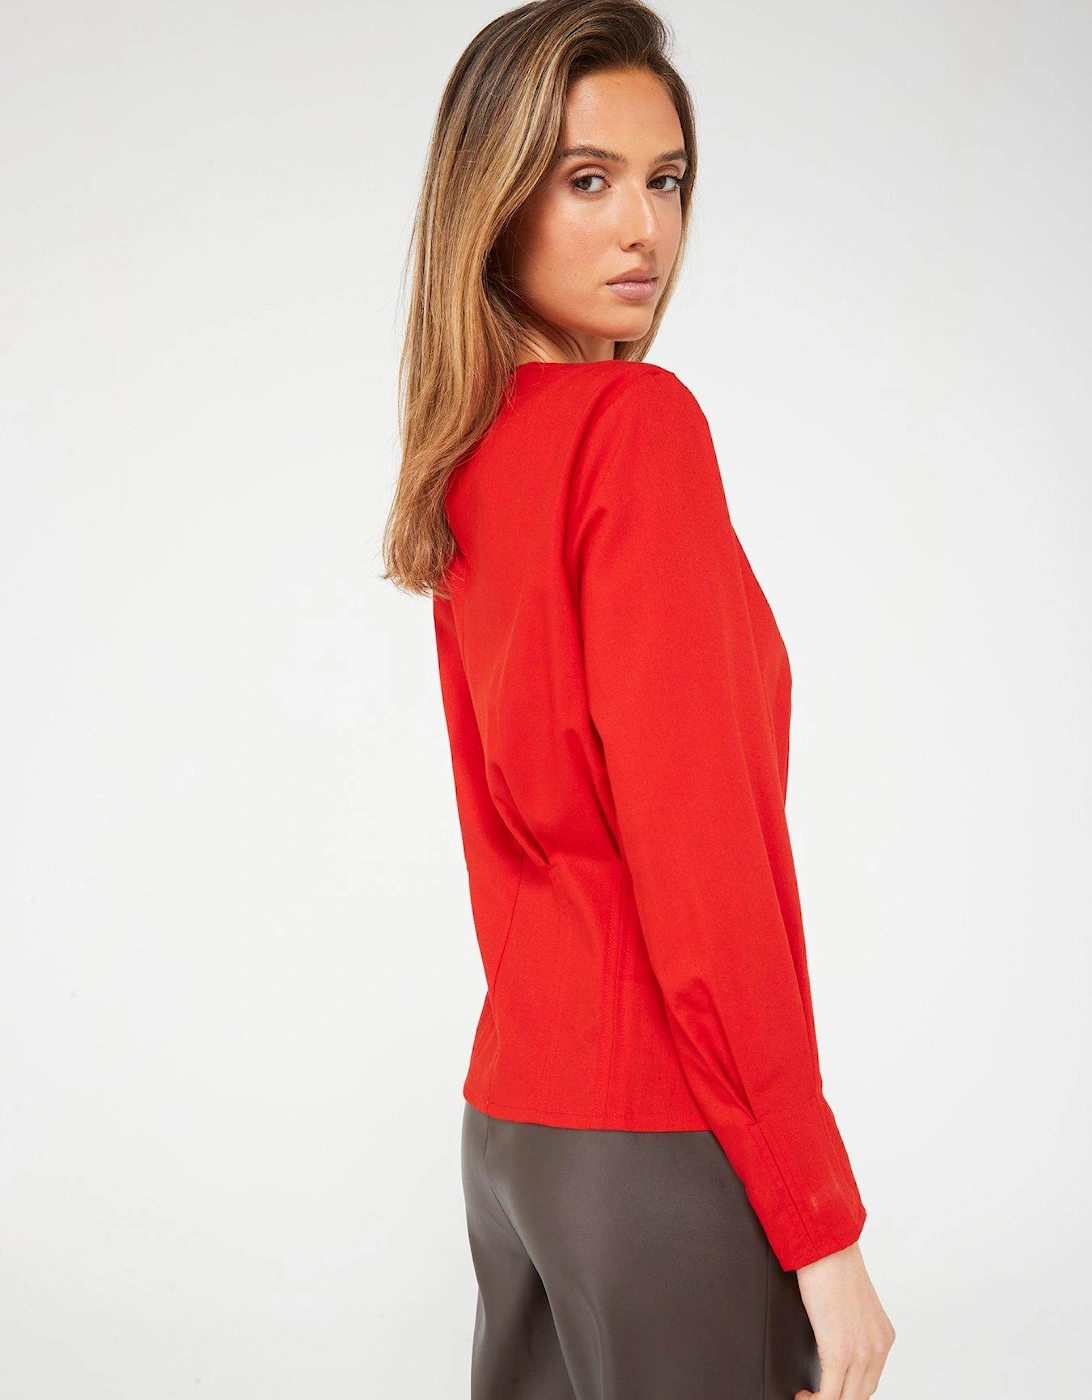 Long Sleeve Gathered Neck Corset Blouse - Red